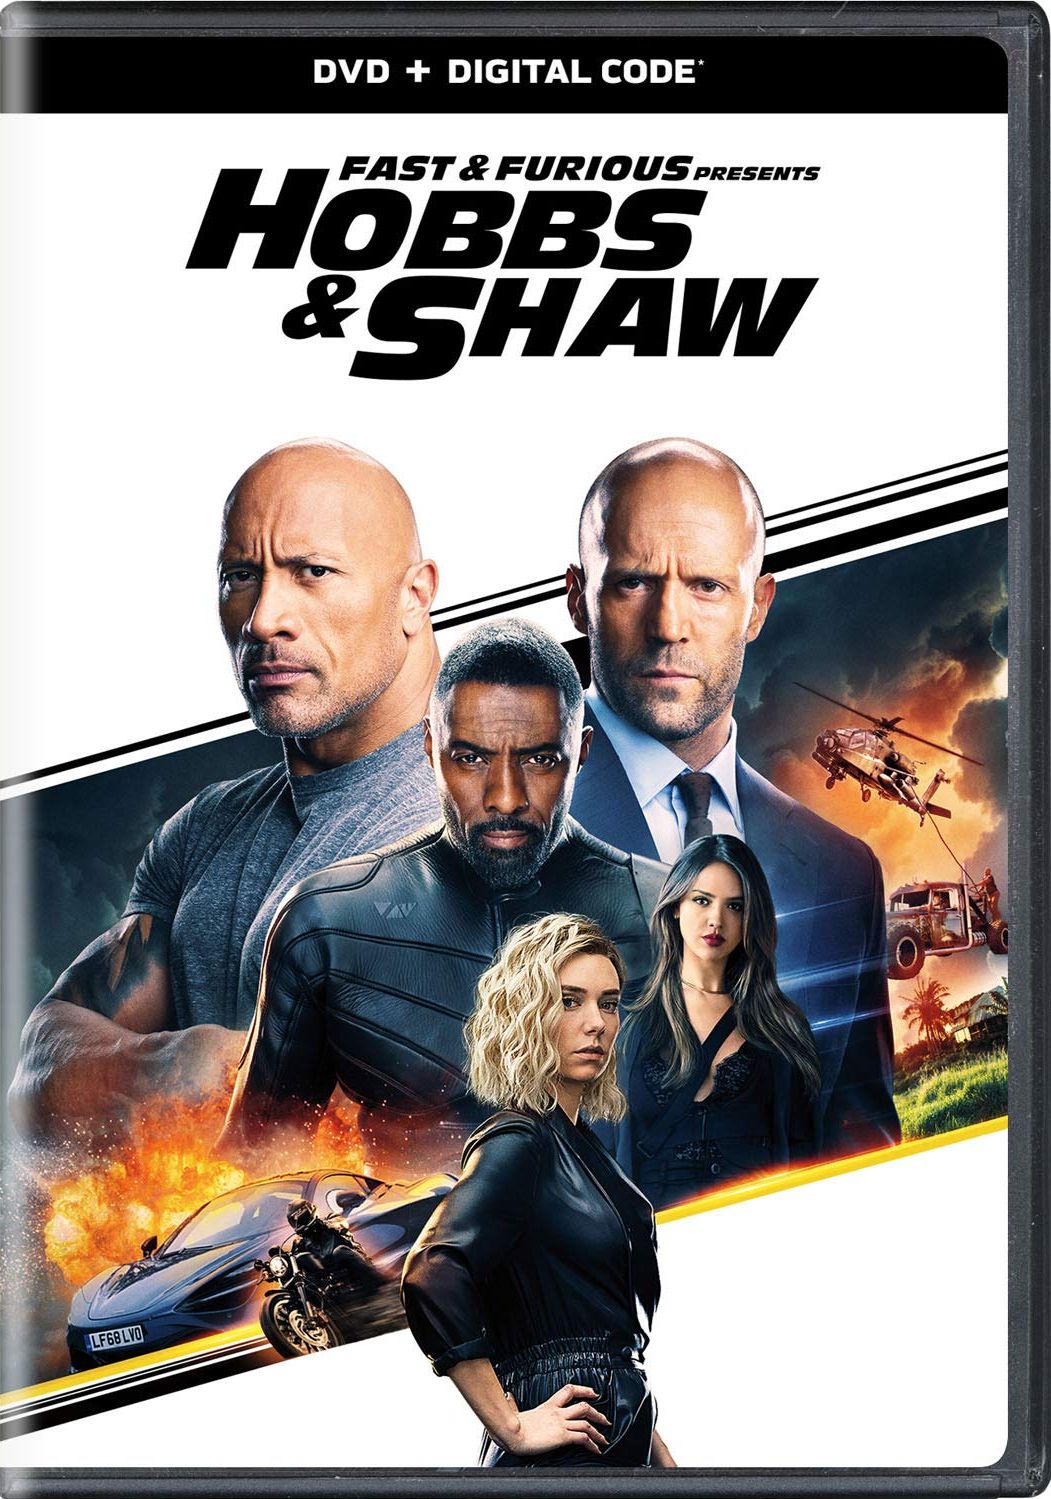 Fast & Furious Presents: Hobbs & Shaw DVD Release Date November 5, 2019